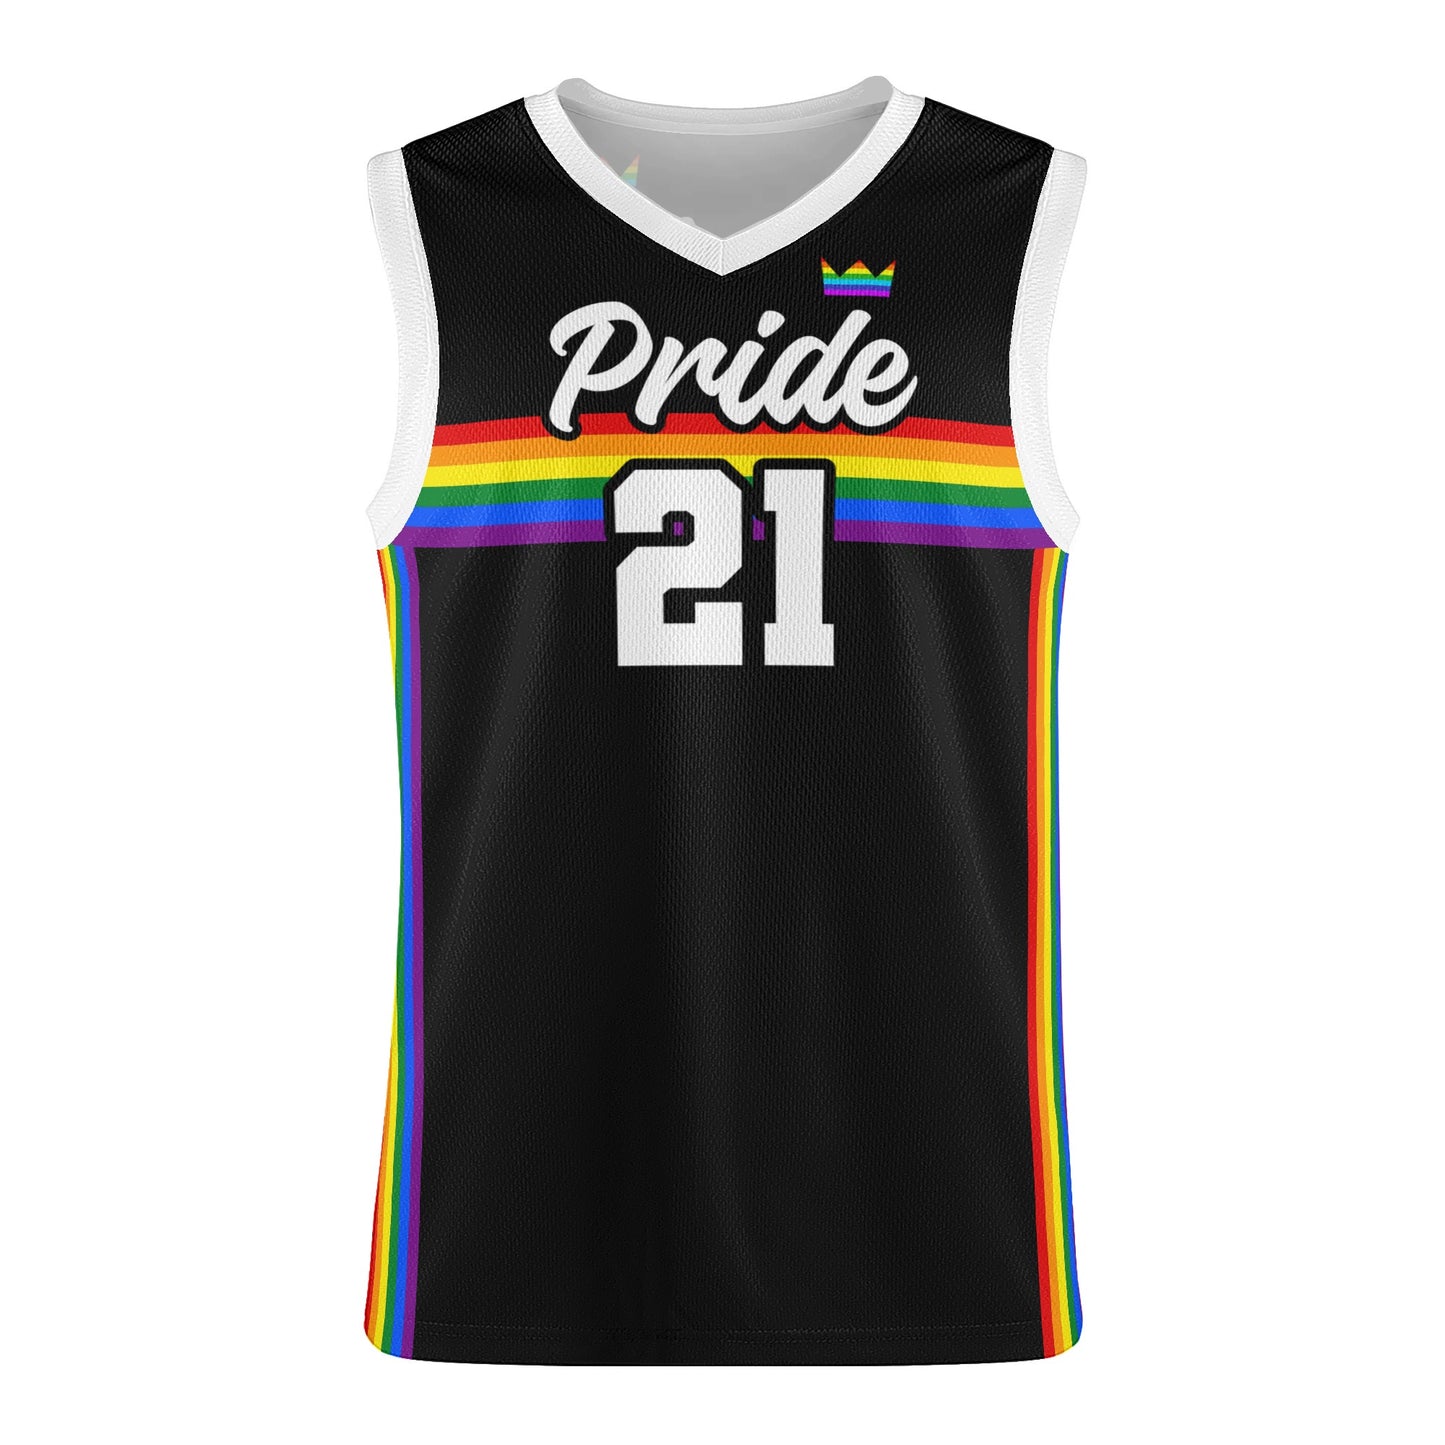 Rainbow Pride Recycled Unisex Jersey - Rose Gold Co. Shop